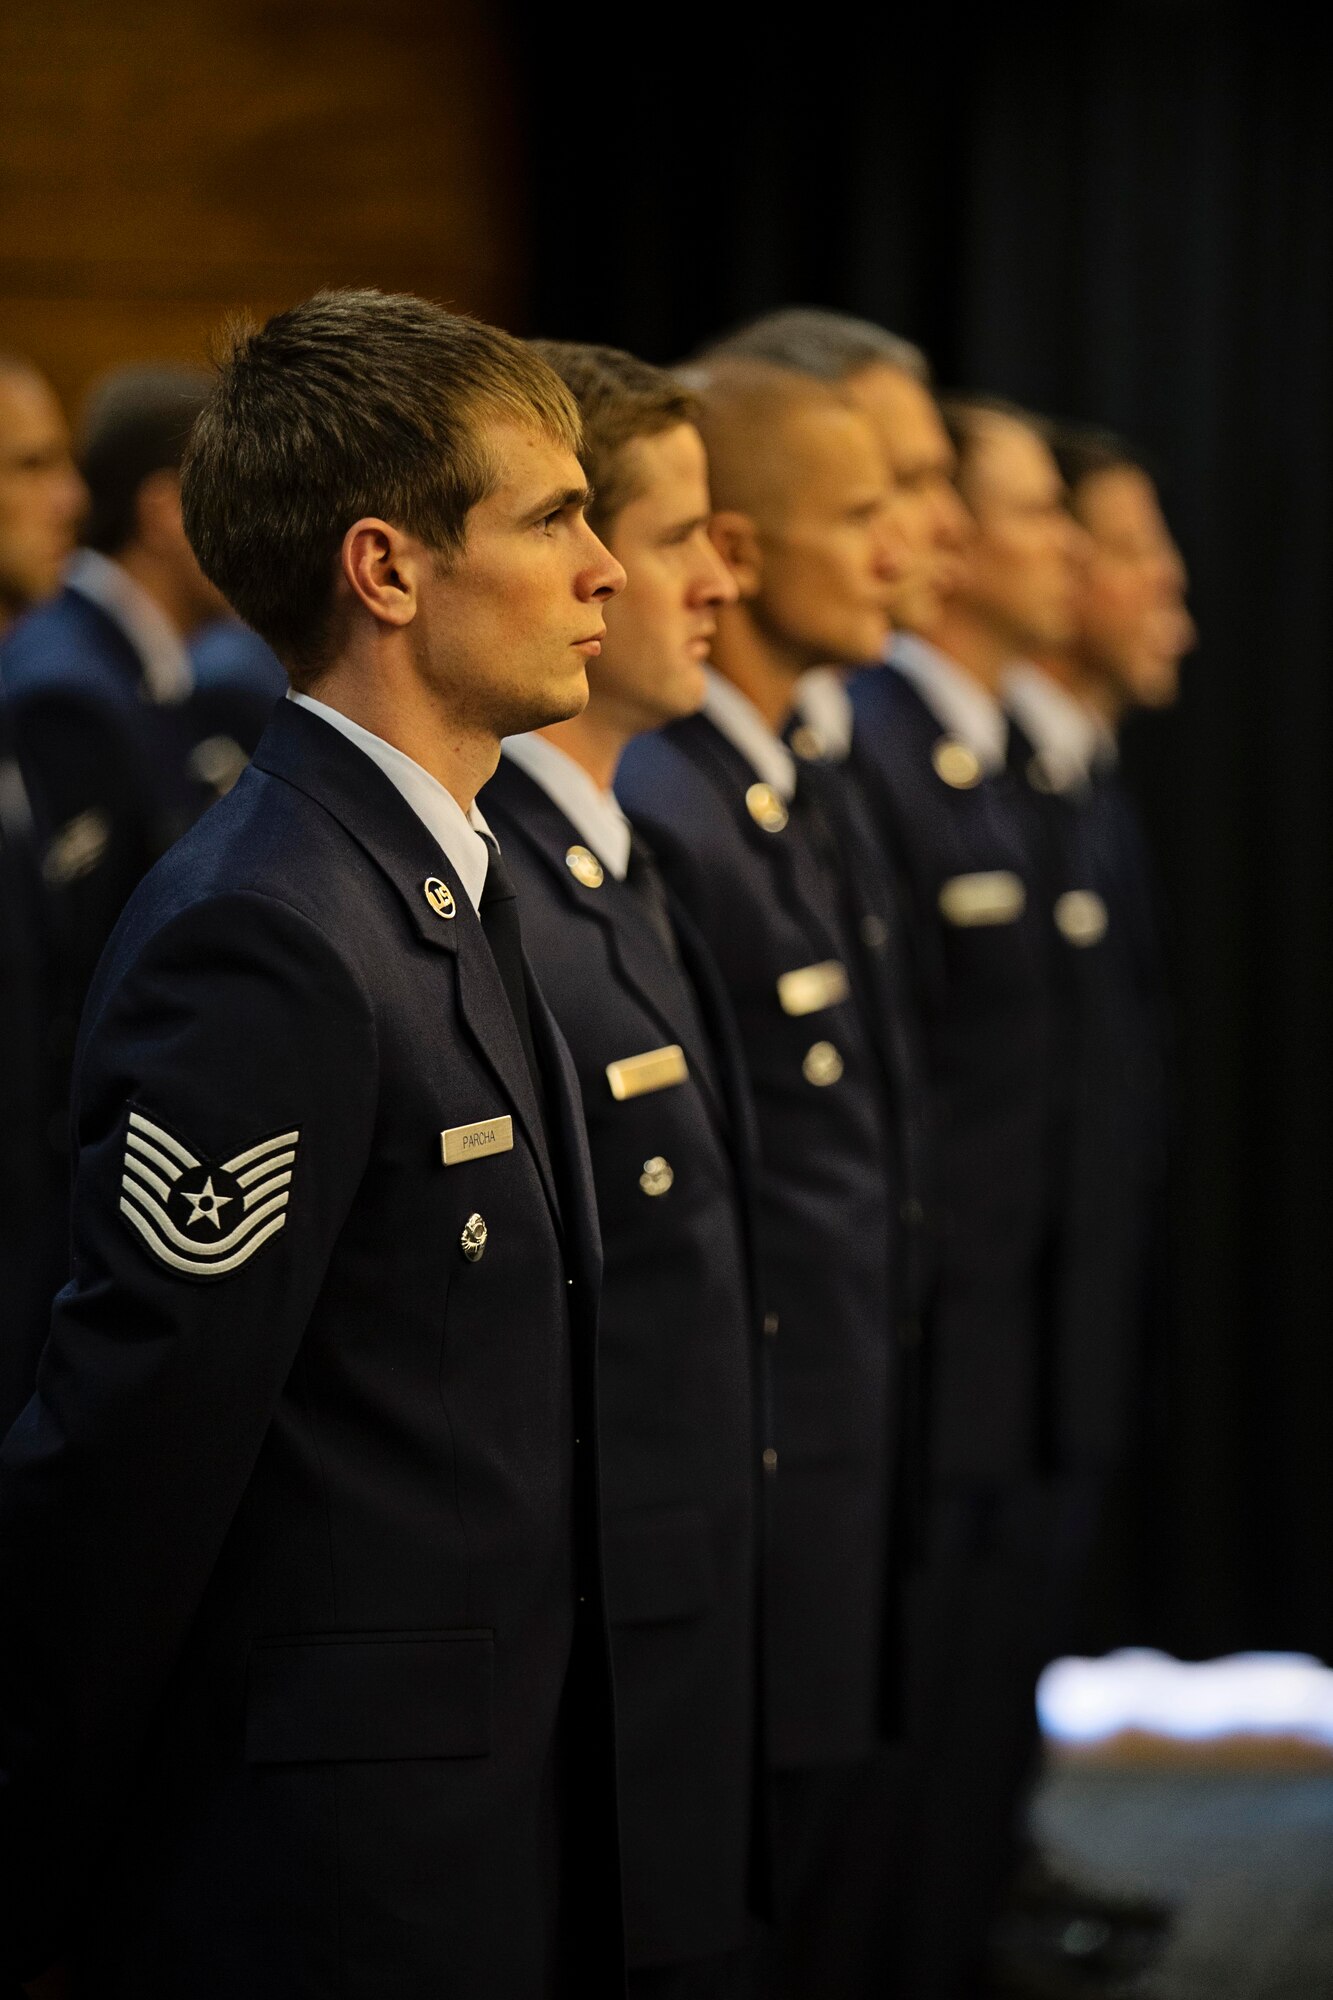 Pararescuemen with the Alaska Air National Guard's 212th Rescue Squadron stand in formation during a Silver Star Medal award ceremony on Joint Base Elmendorf-Richardson, July 11. A fellow 212th pararescueman, Master Sgt. Roger Sparks, was awarded the Silver Star, the nation’s third-highest award for valor, for his role in a firefight with insurgents during Operation Bulldog Bite in Afghanistan’s Watapur Valley on Nov. 14, 2010. His actions during the combat operation resulted in four American lives being saved and four casualties being returned to their families with honor and dignity. (U.S. Army National Guard photo by Sgt. Edward Eagerton/released)